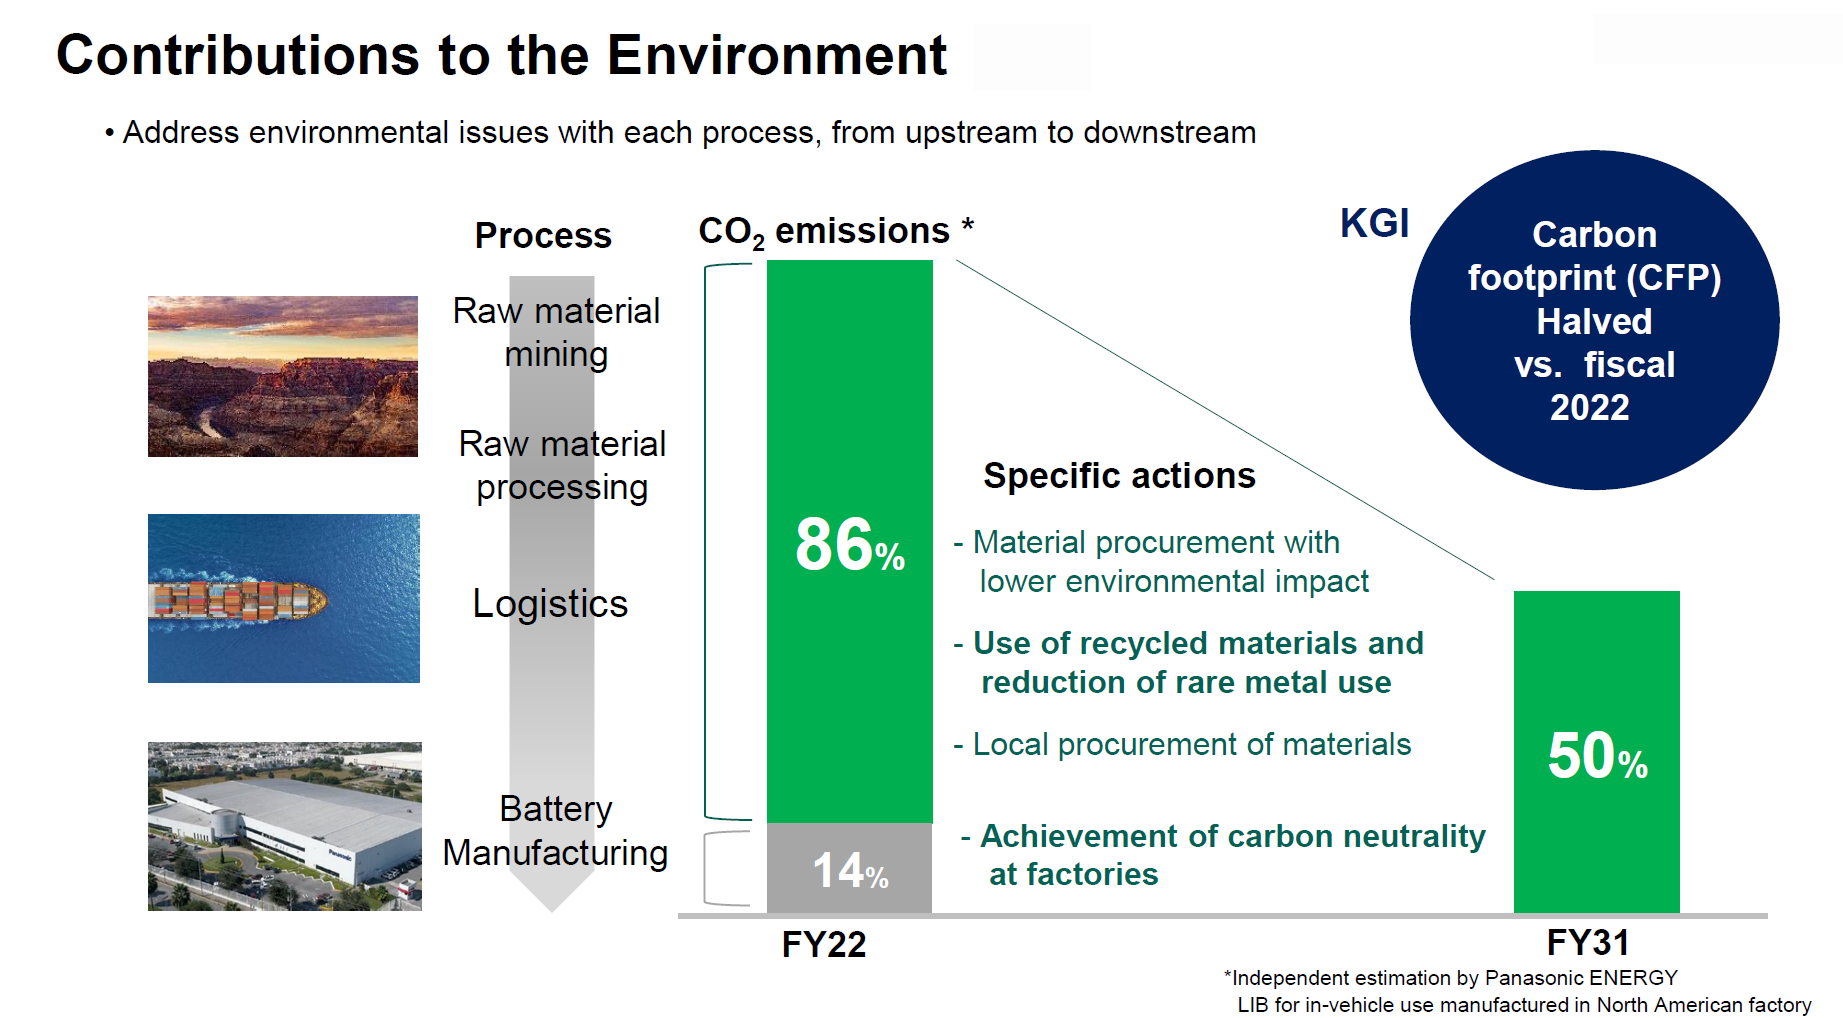 Figure: Contributions to the environment